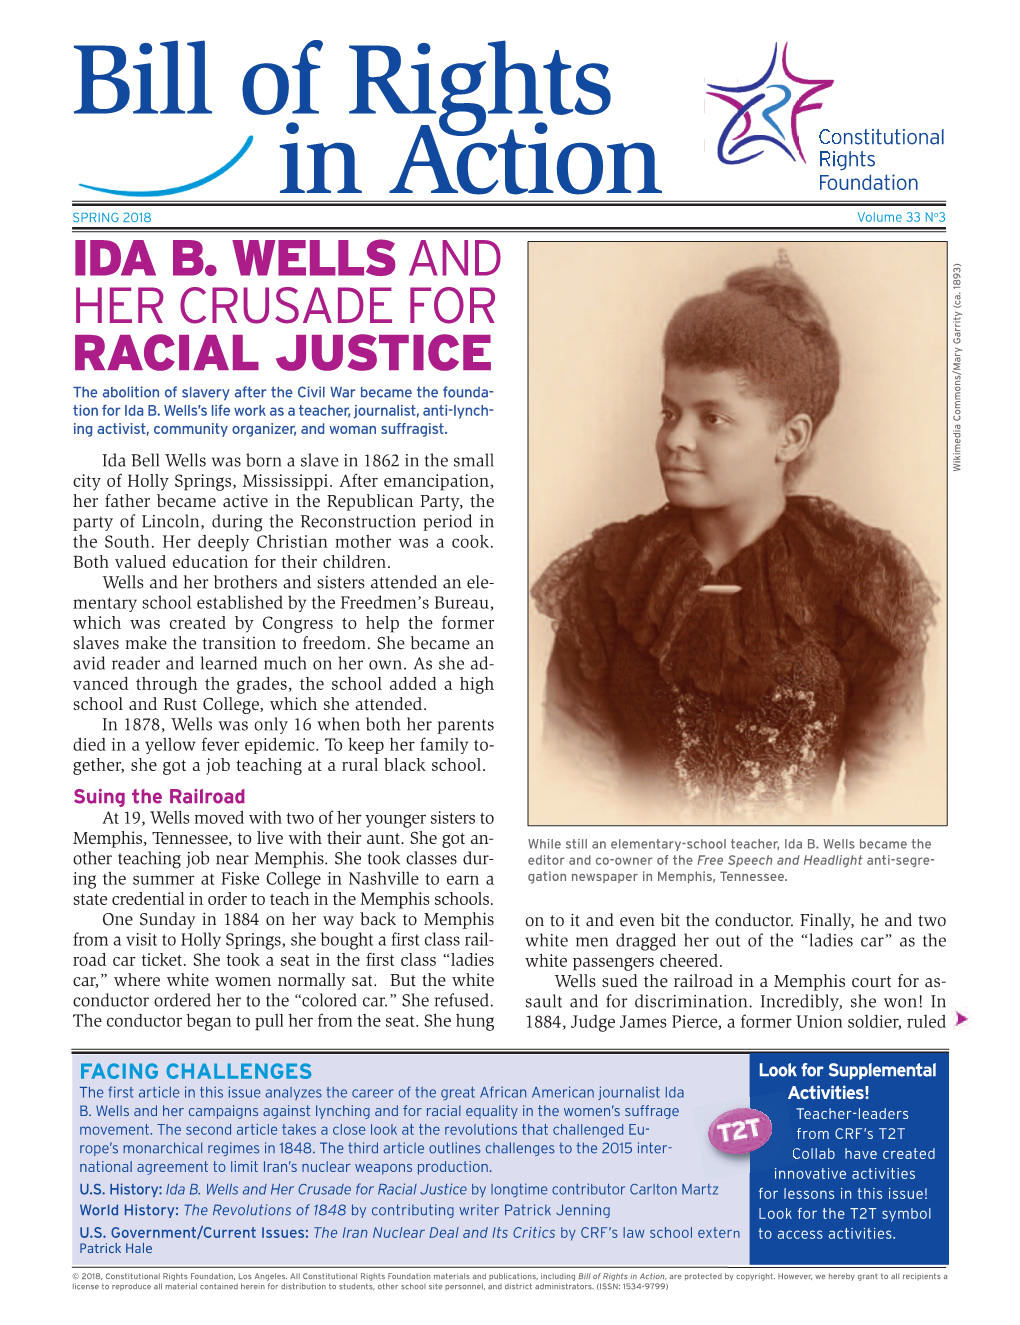 Ida B. Wells and Her Crusade for Racial Justice